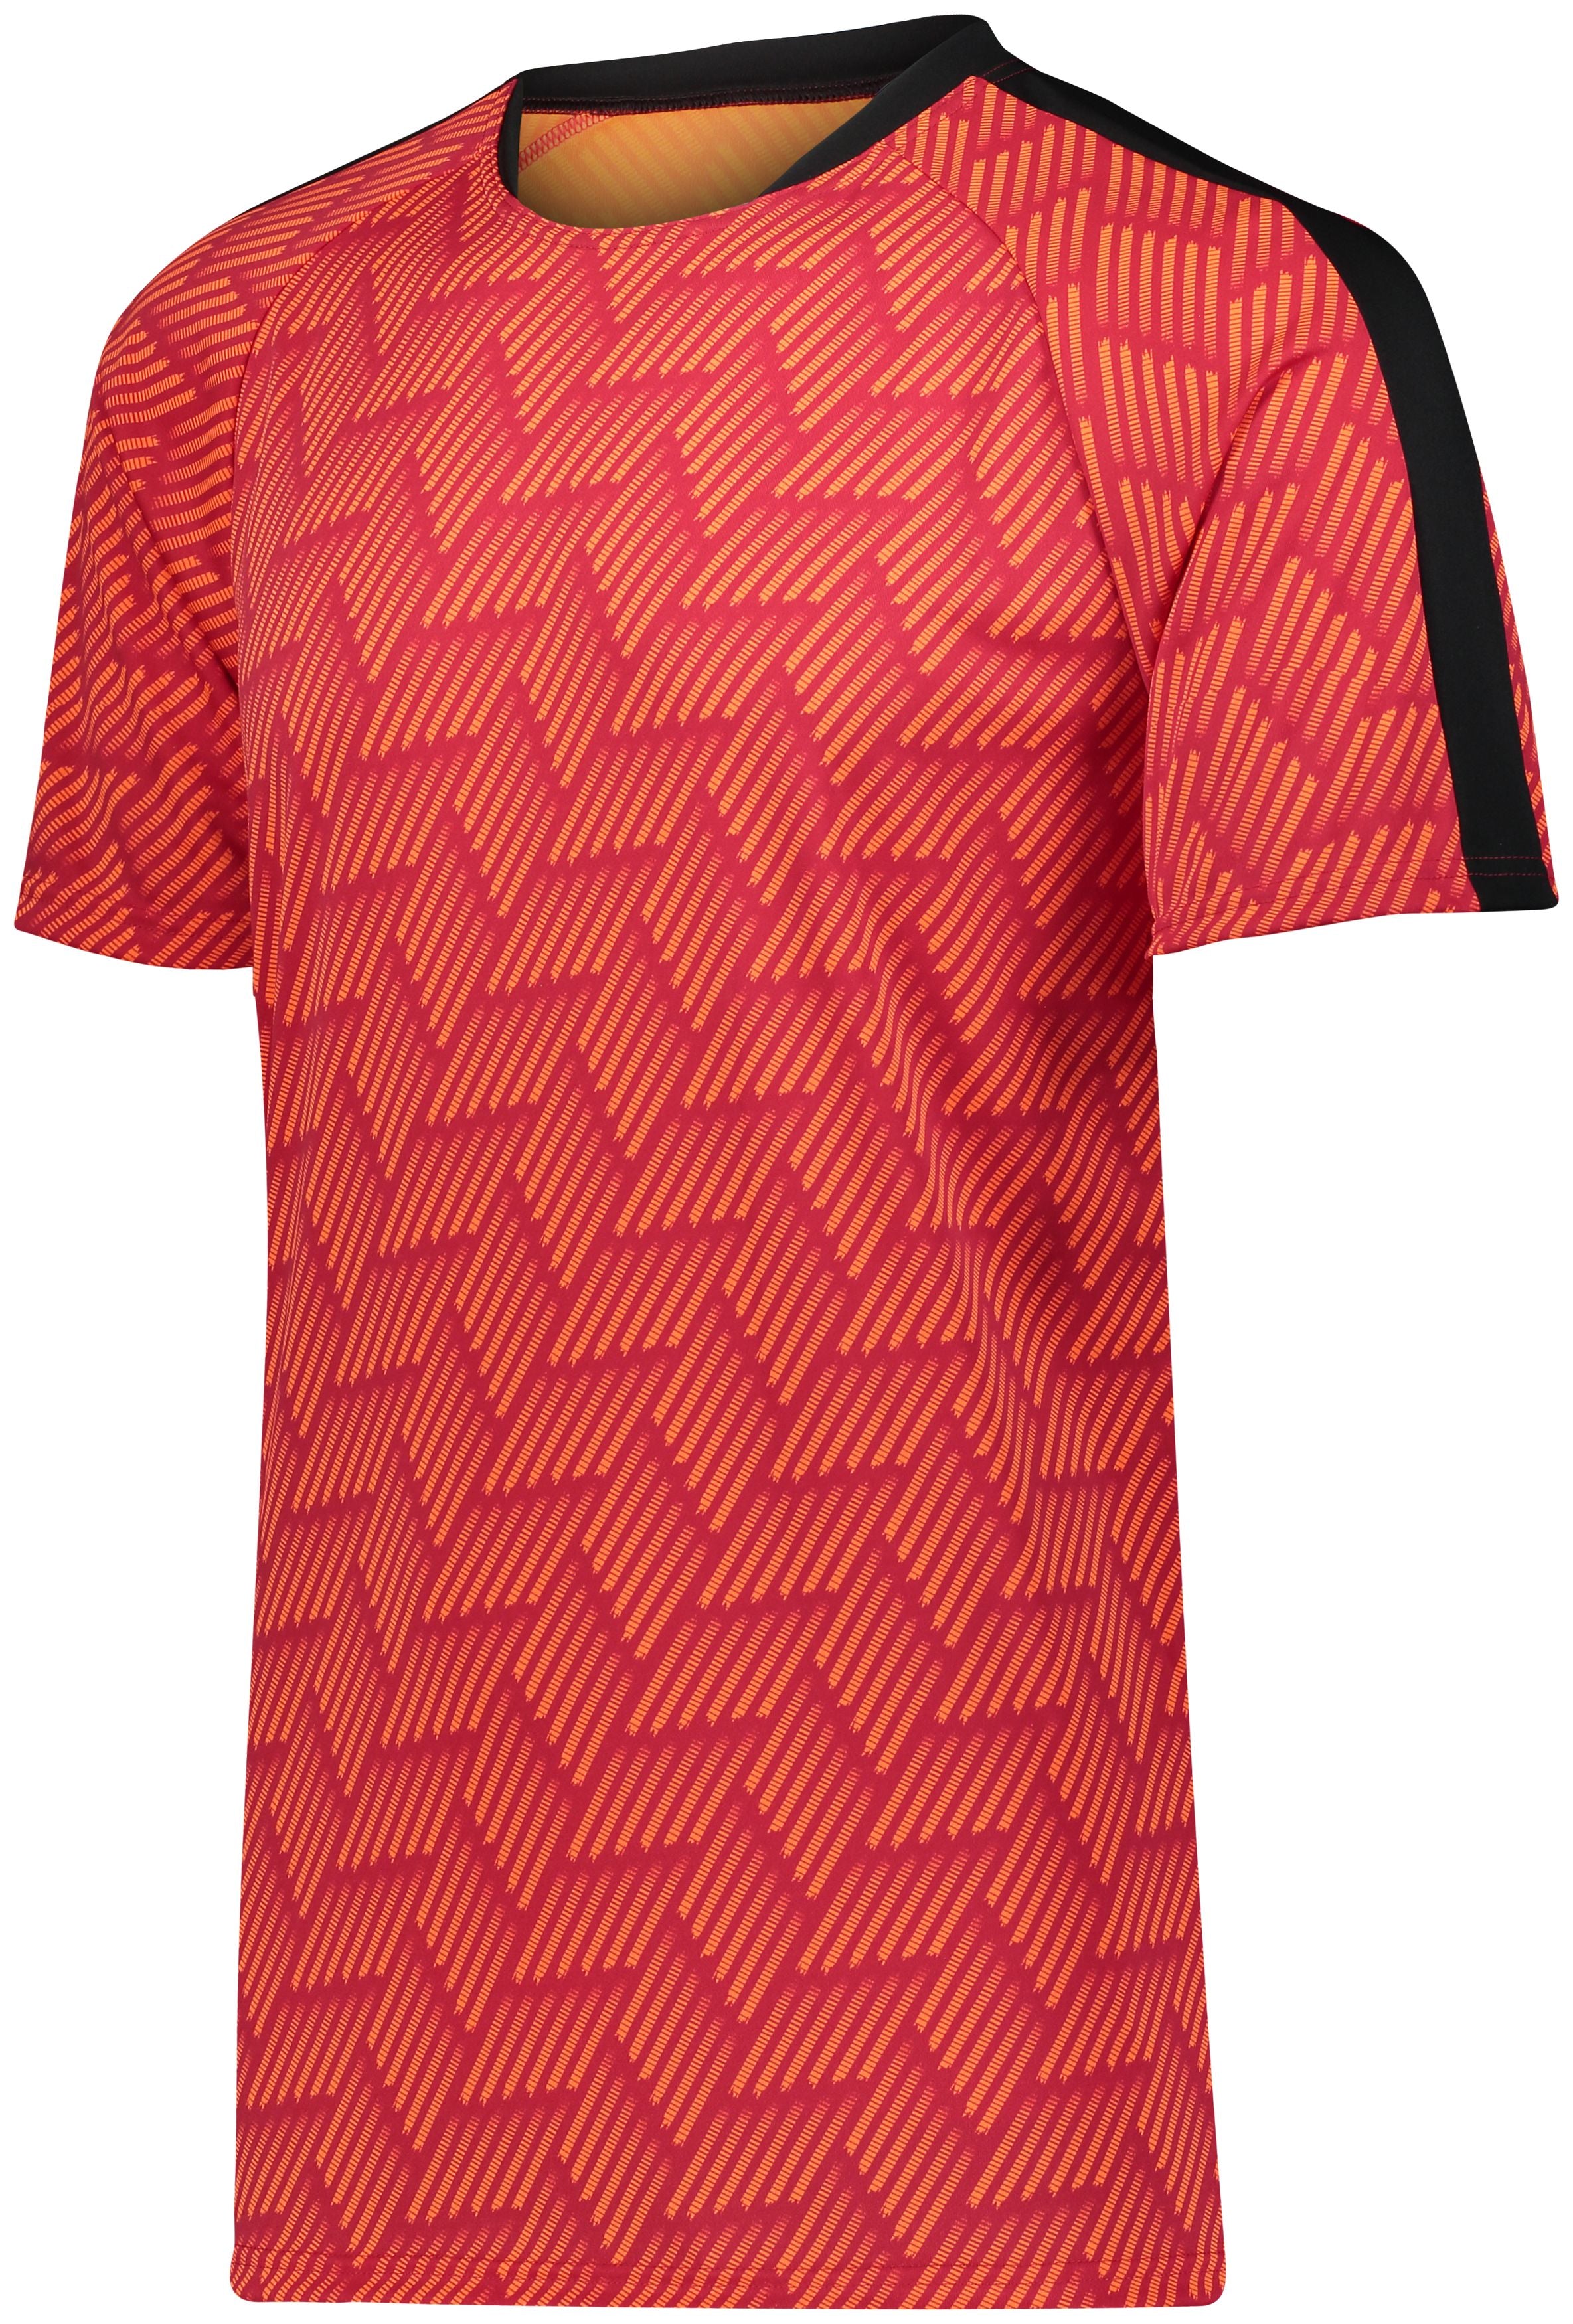 High 5 Hypervolt Jersey in Scarlet Print/Black  -Part of the Adult, Adult-Jersey, High5-Products, Soccer, Shirts, All-Sports-1 product lines at KanaleyCreations.com